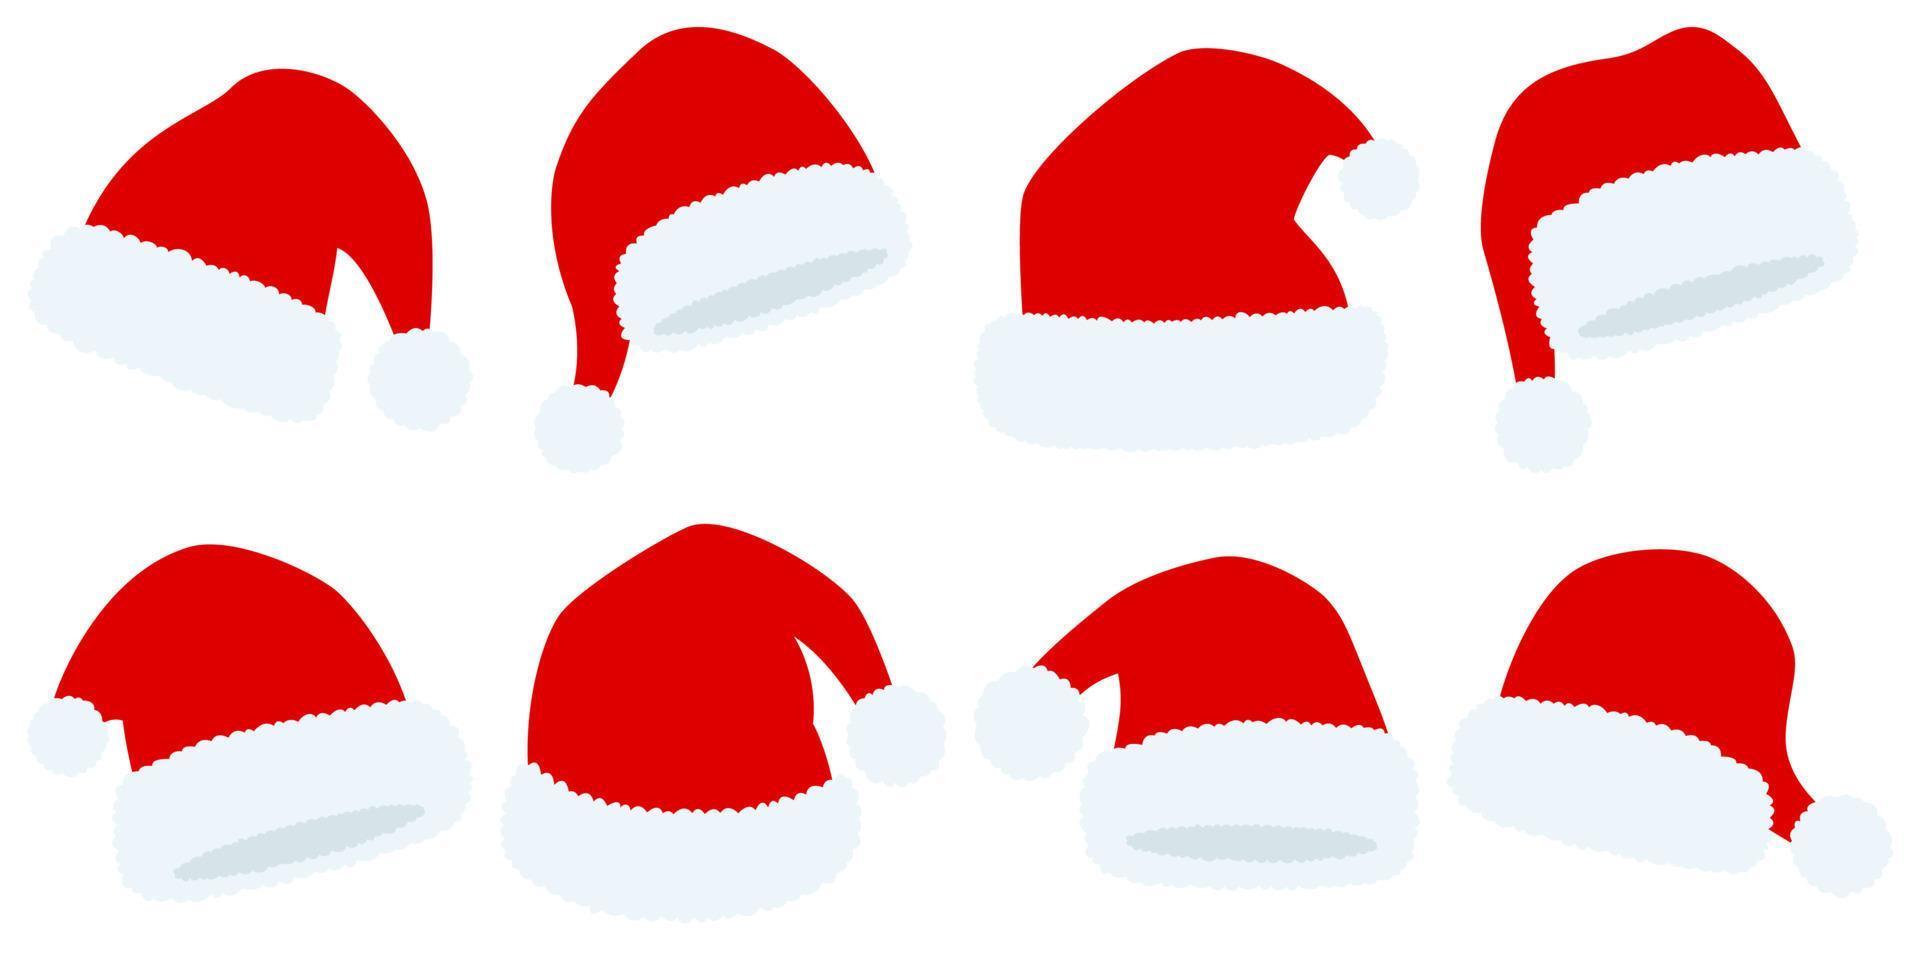 Set of Santa Claus hat isolated on white background vector